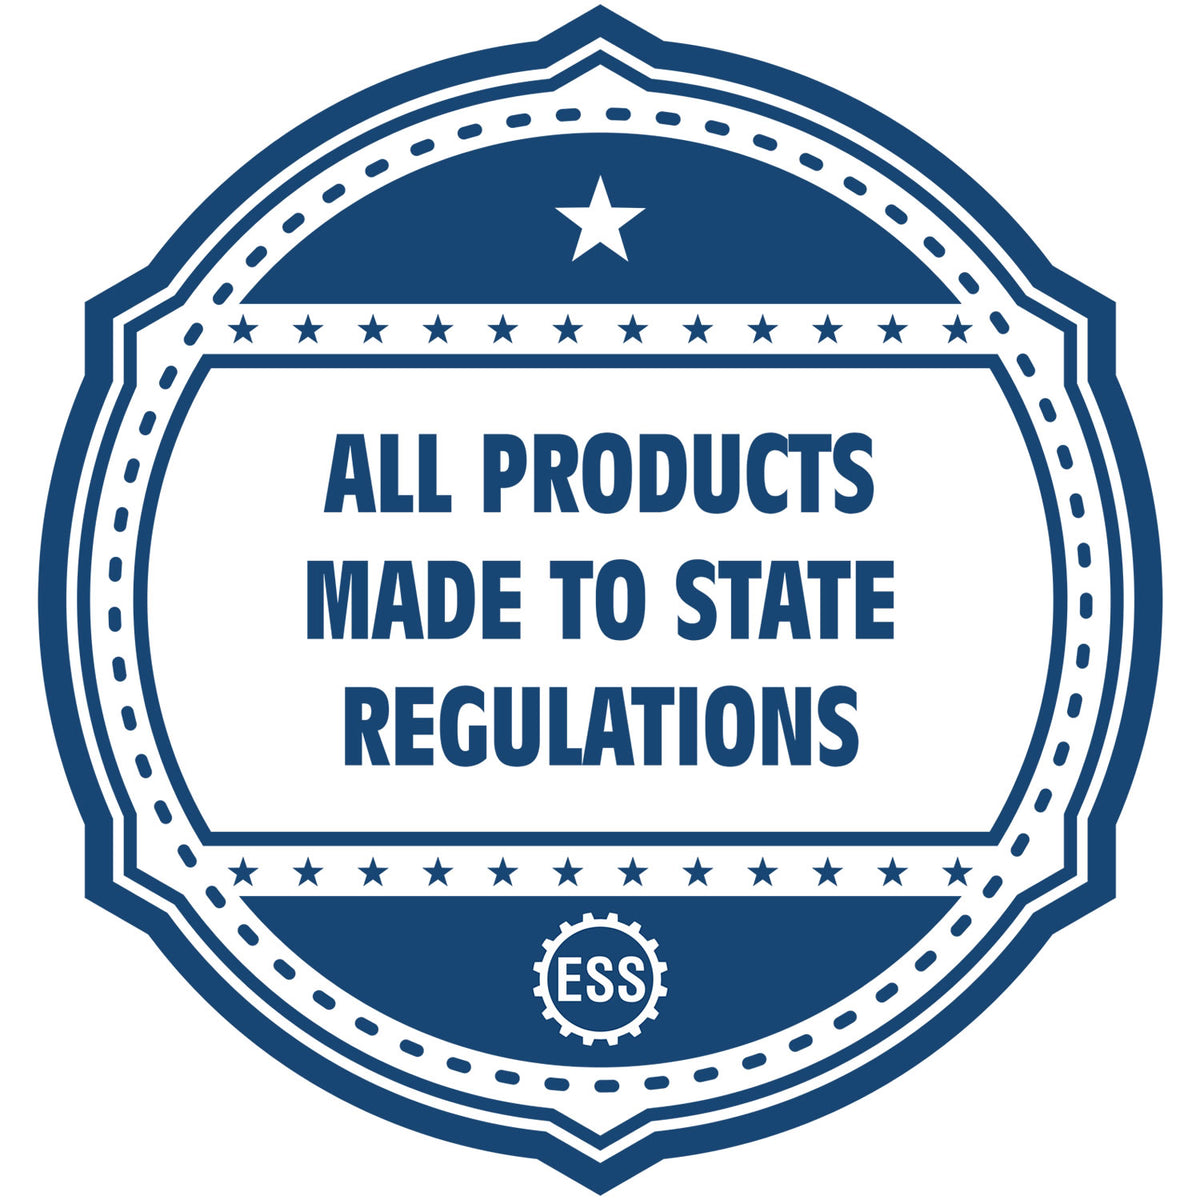 A blue icon or badge for the Hybrid Maine Architect Seal showing that this product is made in compliance with state regulations.